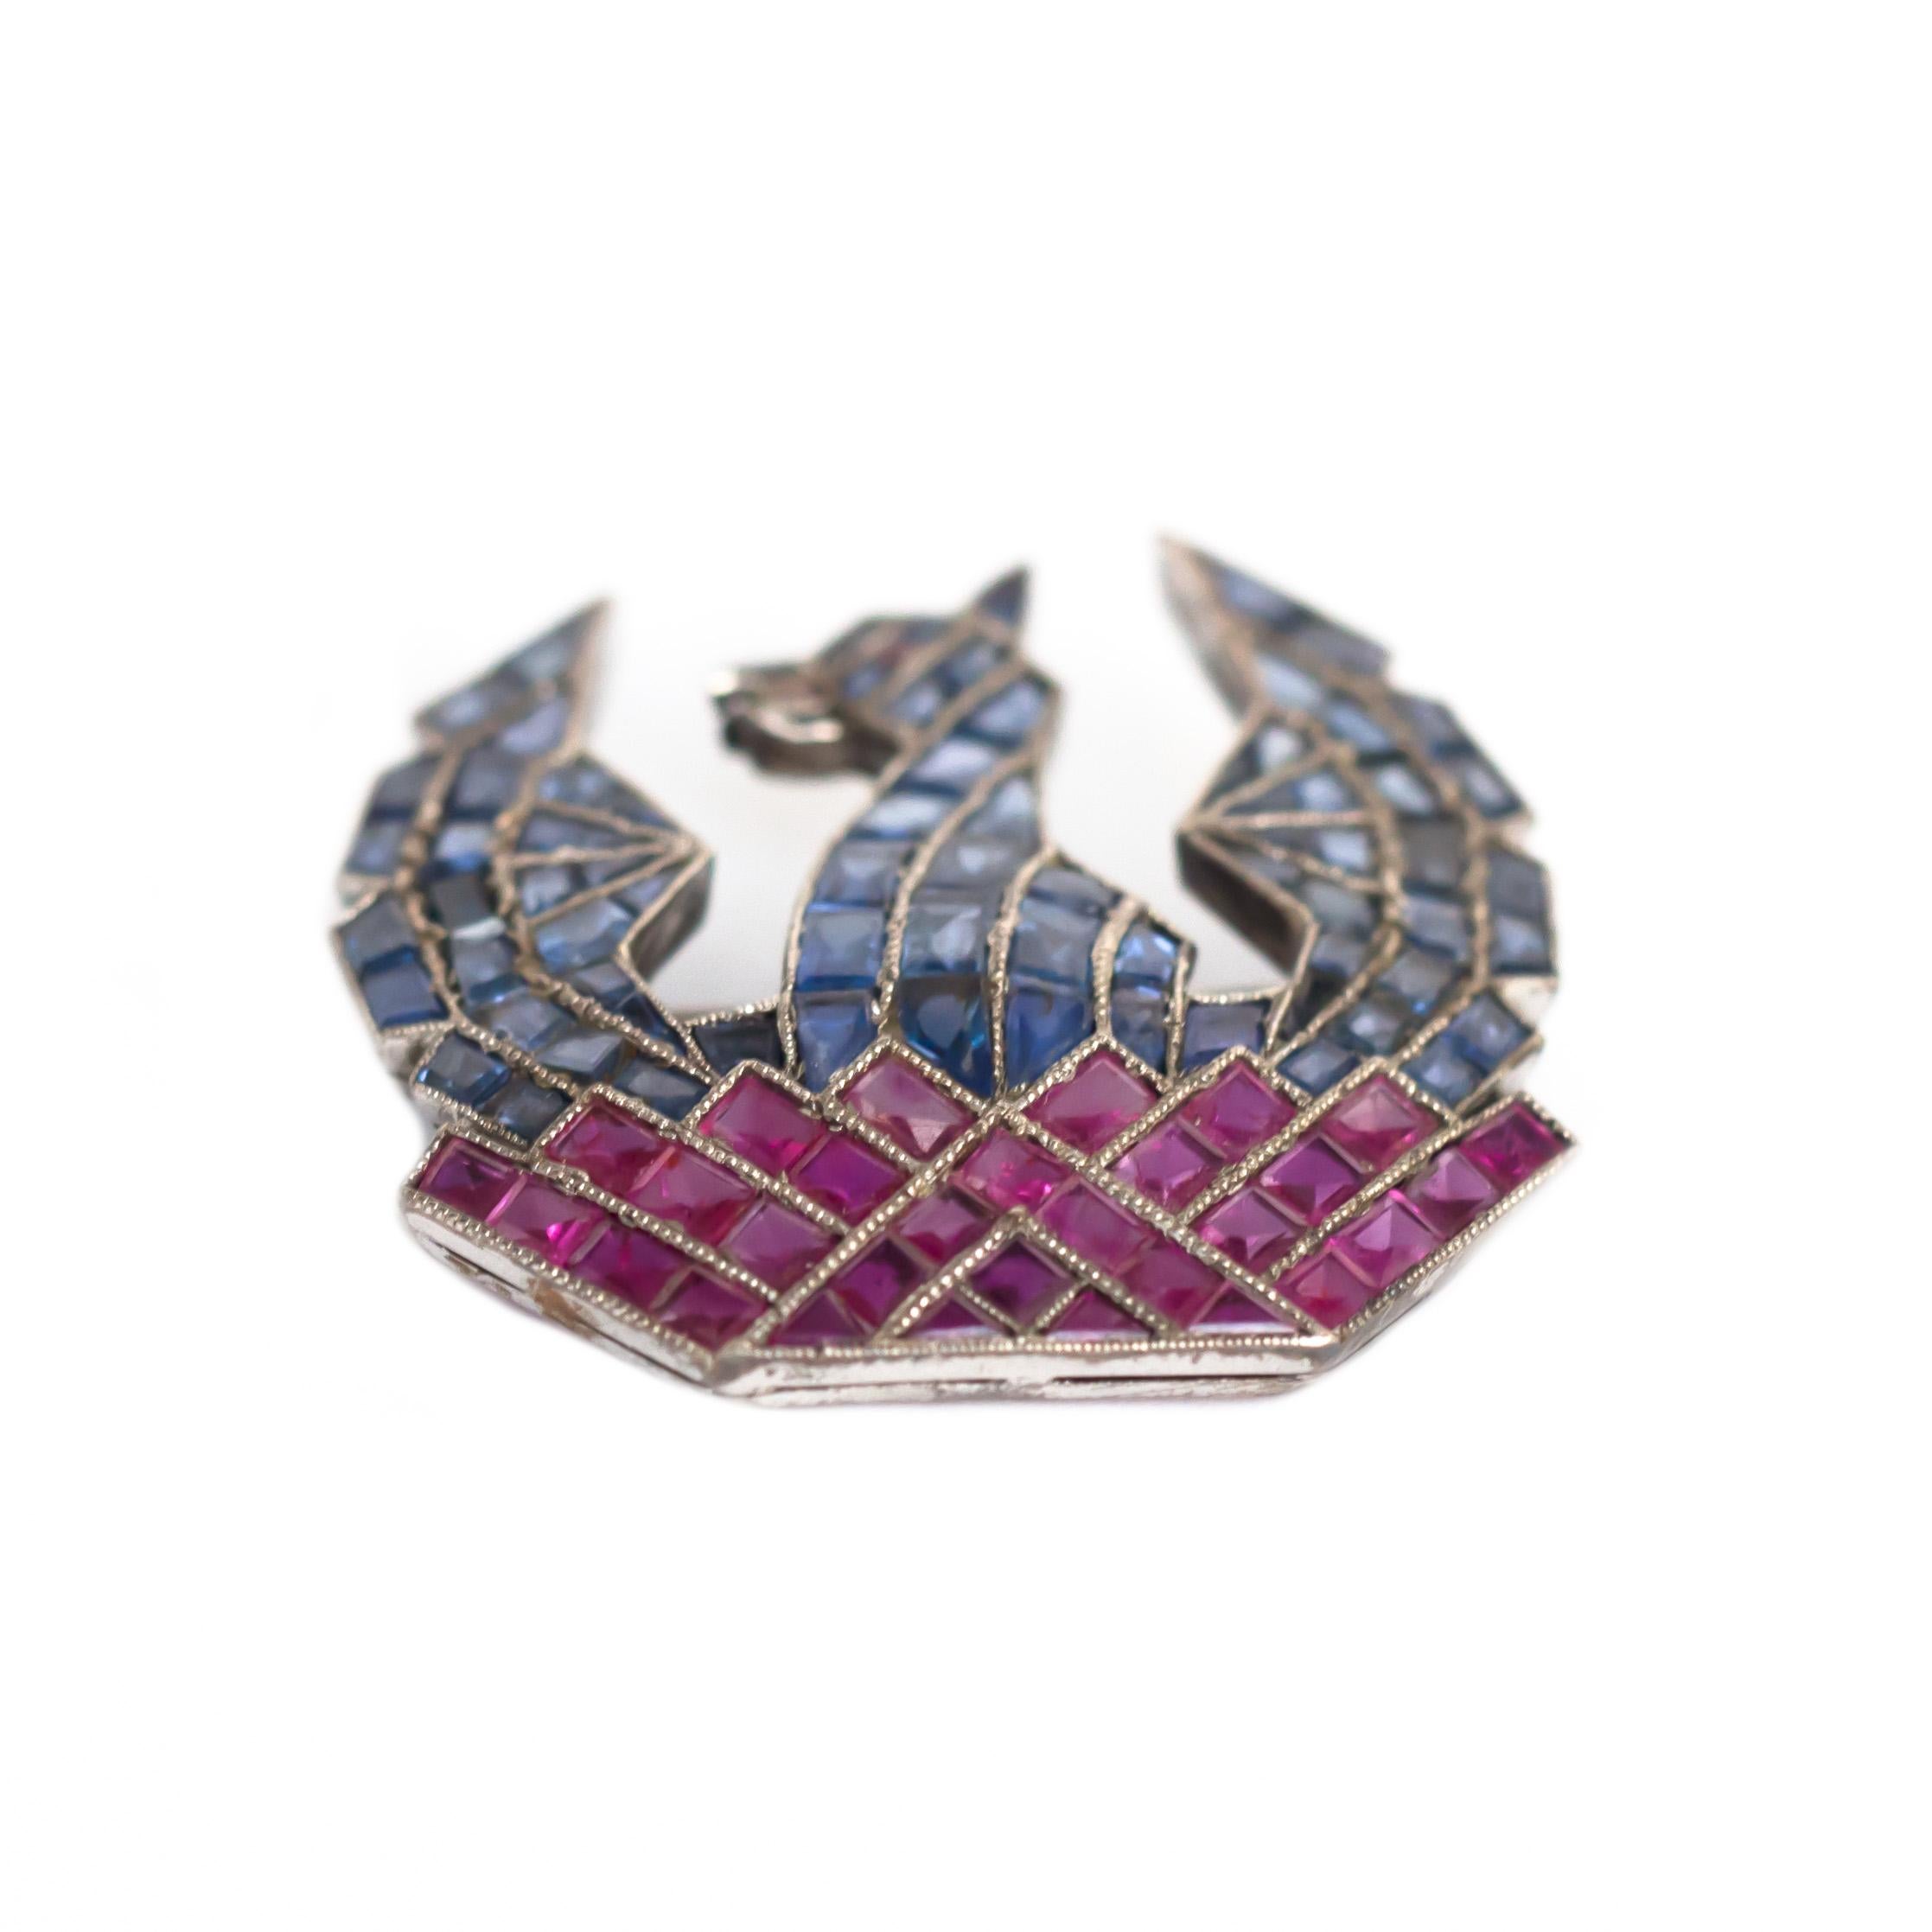 Metal Type: Platinum & Silver  [Hallmarked, and Tested]
Weight:  8.1 grams

Sapphire Details:
Weight: 2.00 carat
Cut: Old Portrait Cut
Color: Blue, Natural, Unheated
Clarity: Mixed

Ruby Details:
Weight: 2.00 carat
Cut: Old Portrait Cut
Color: Red,